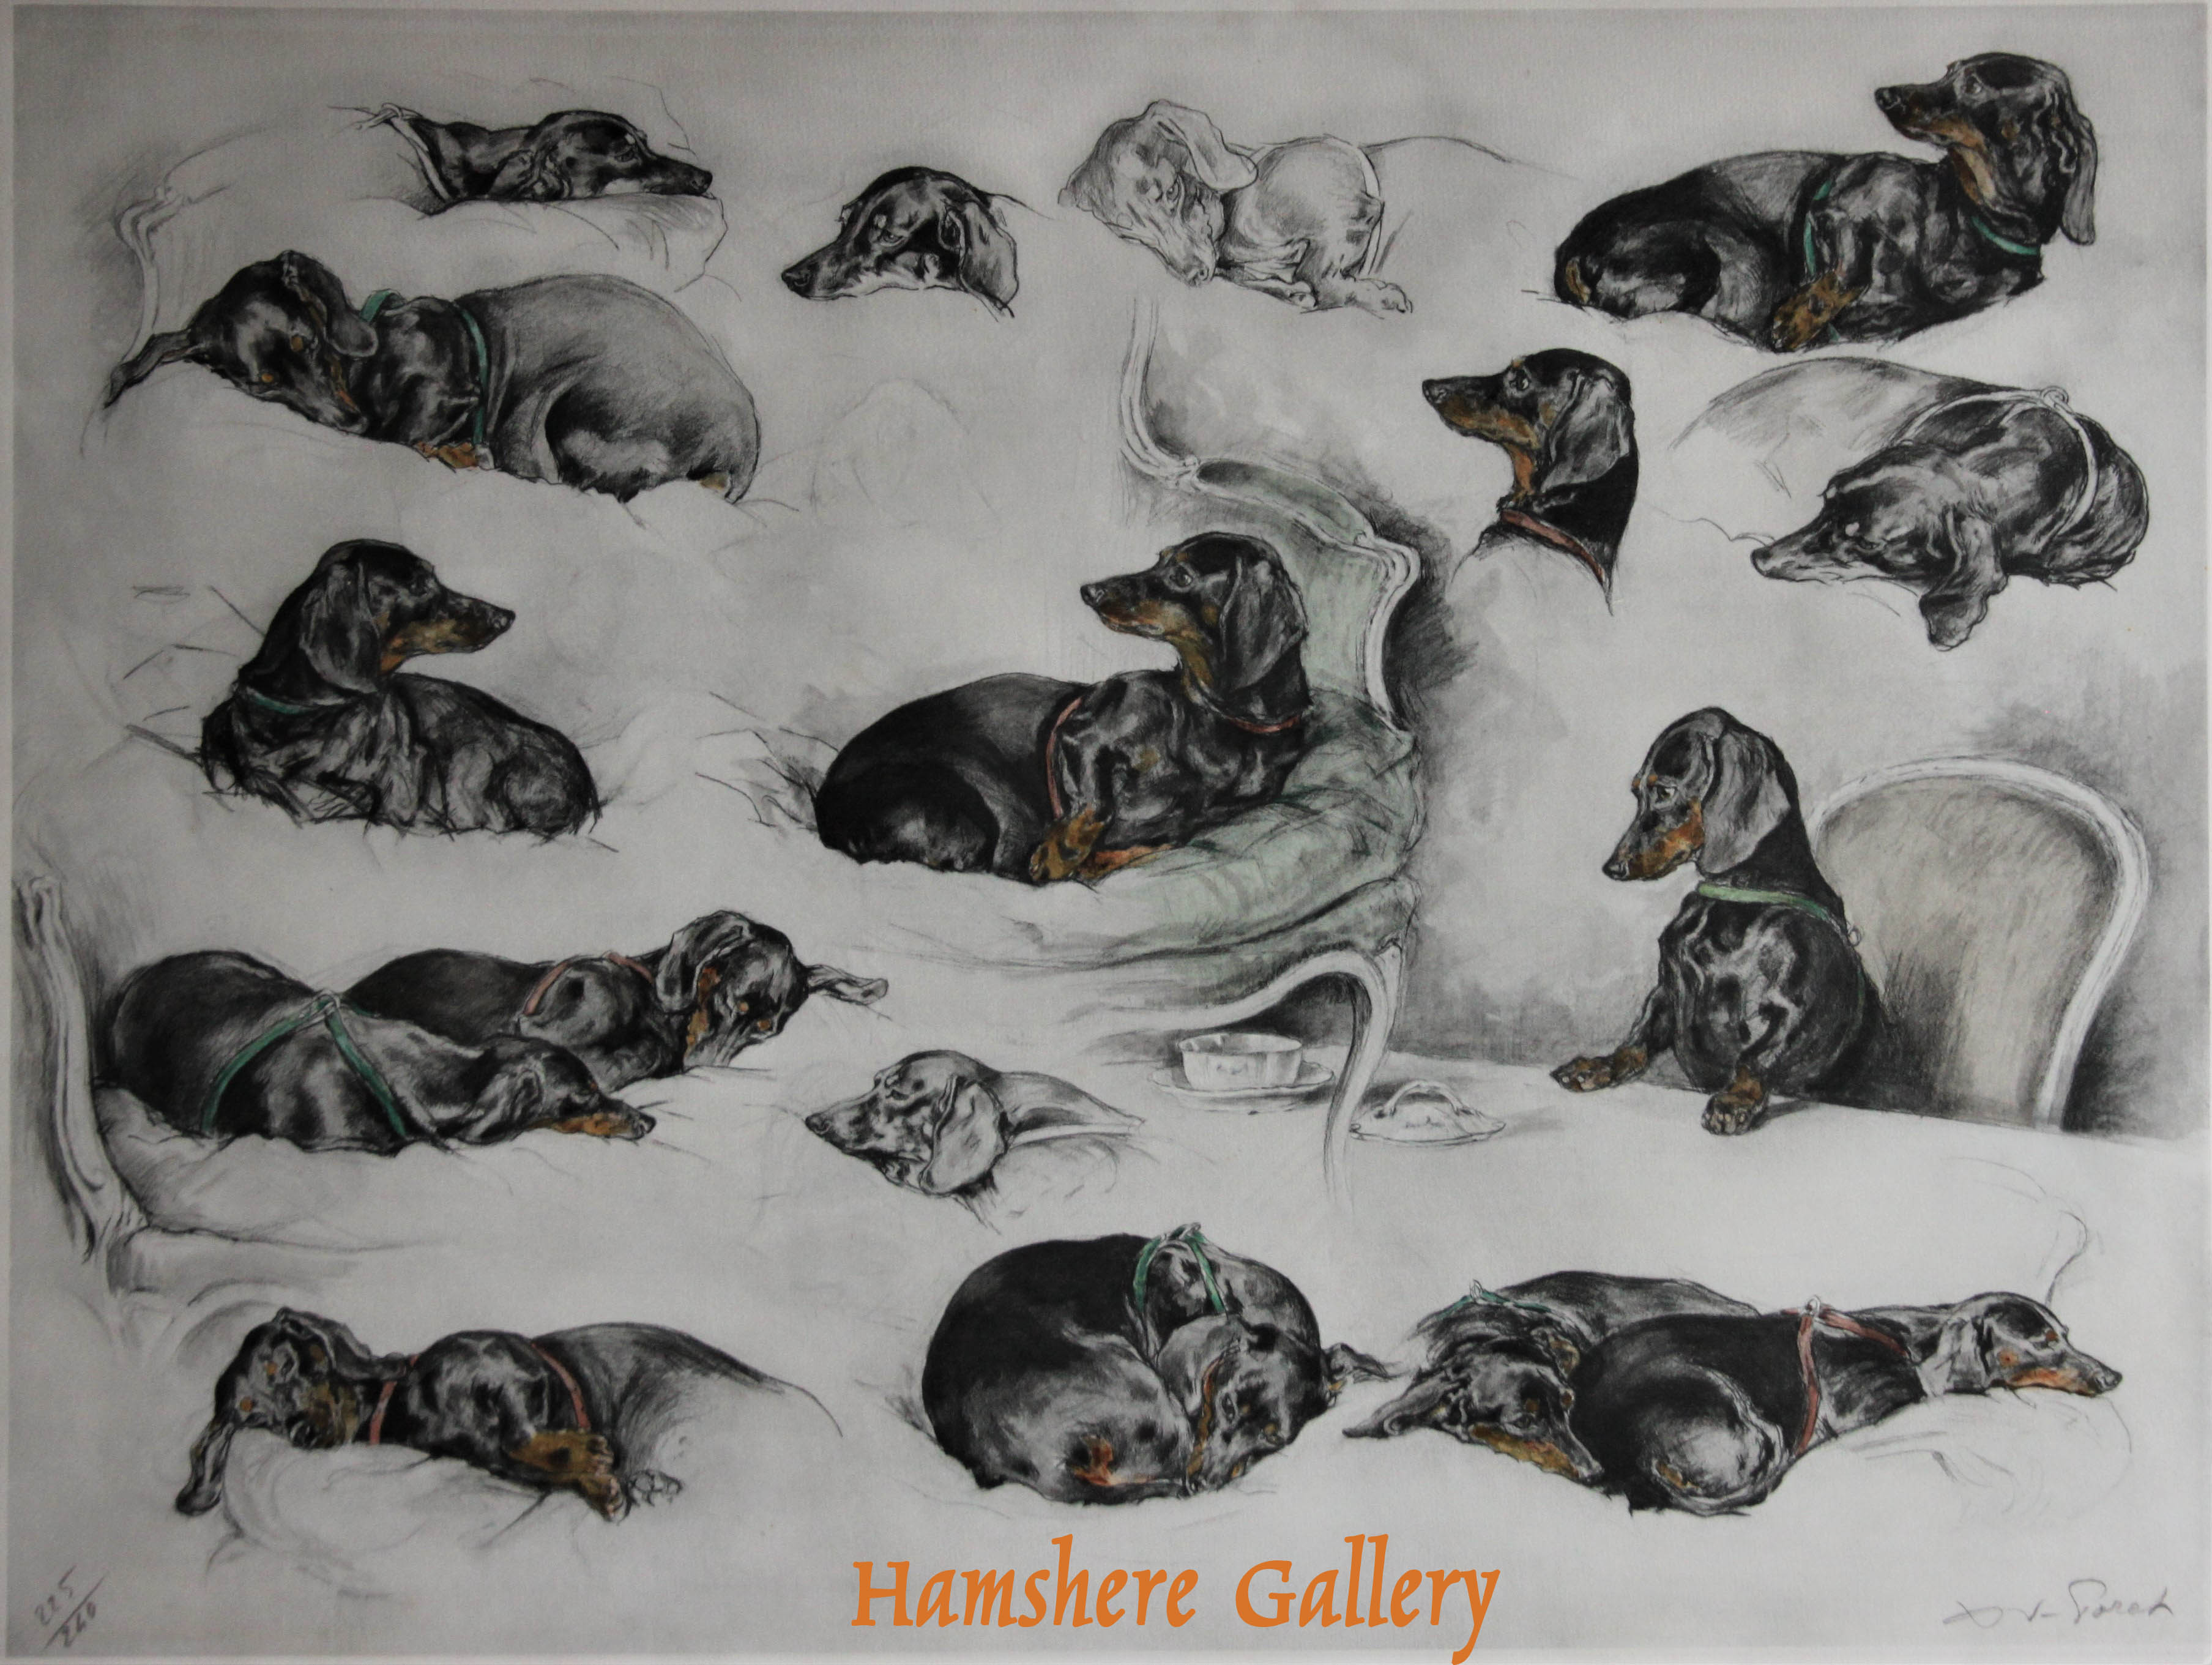 Click to see full size: â€œLes Teckelsâ€ / â€œBassets Allemandsâ€, lithograph of Dachshunds after Xavier de Poret (French, 1894 - 1975)